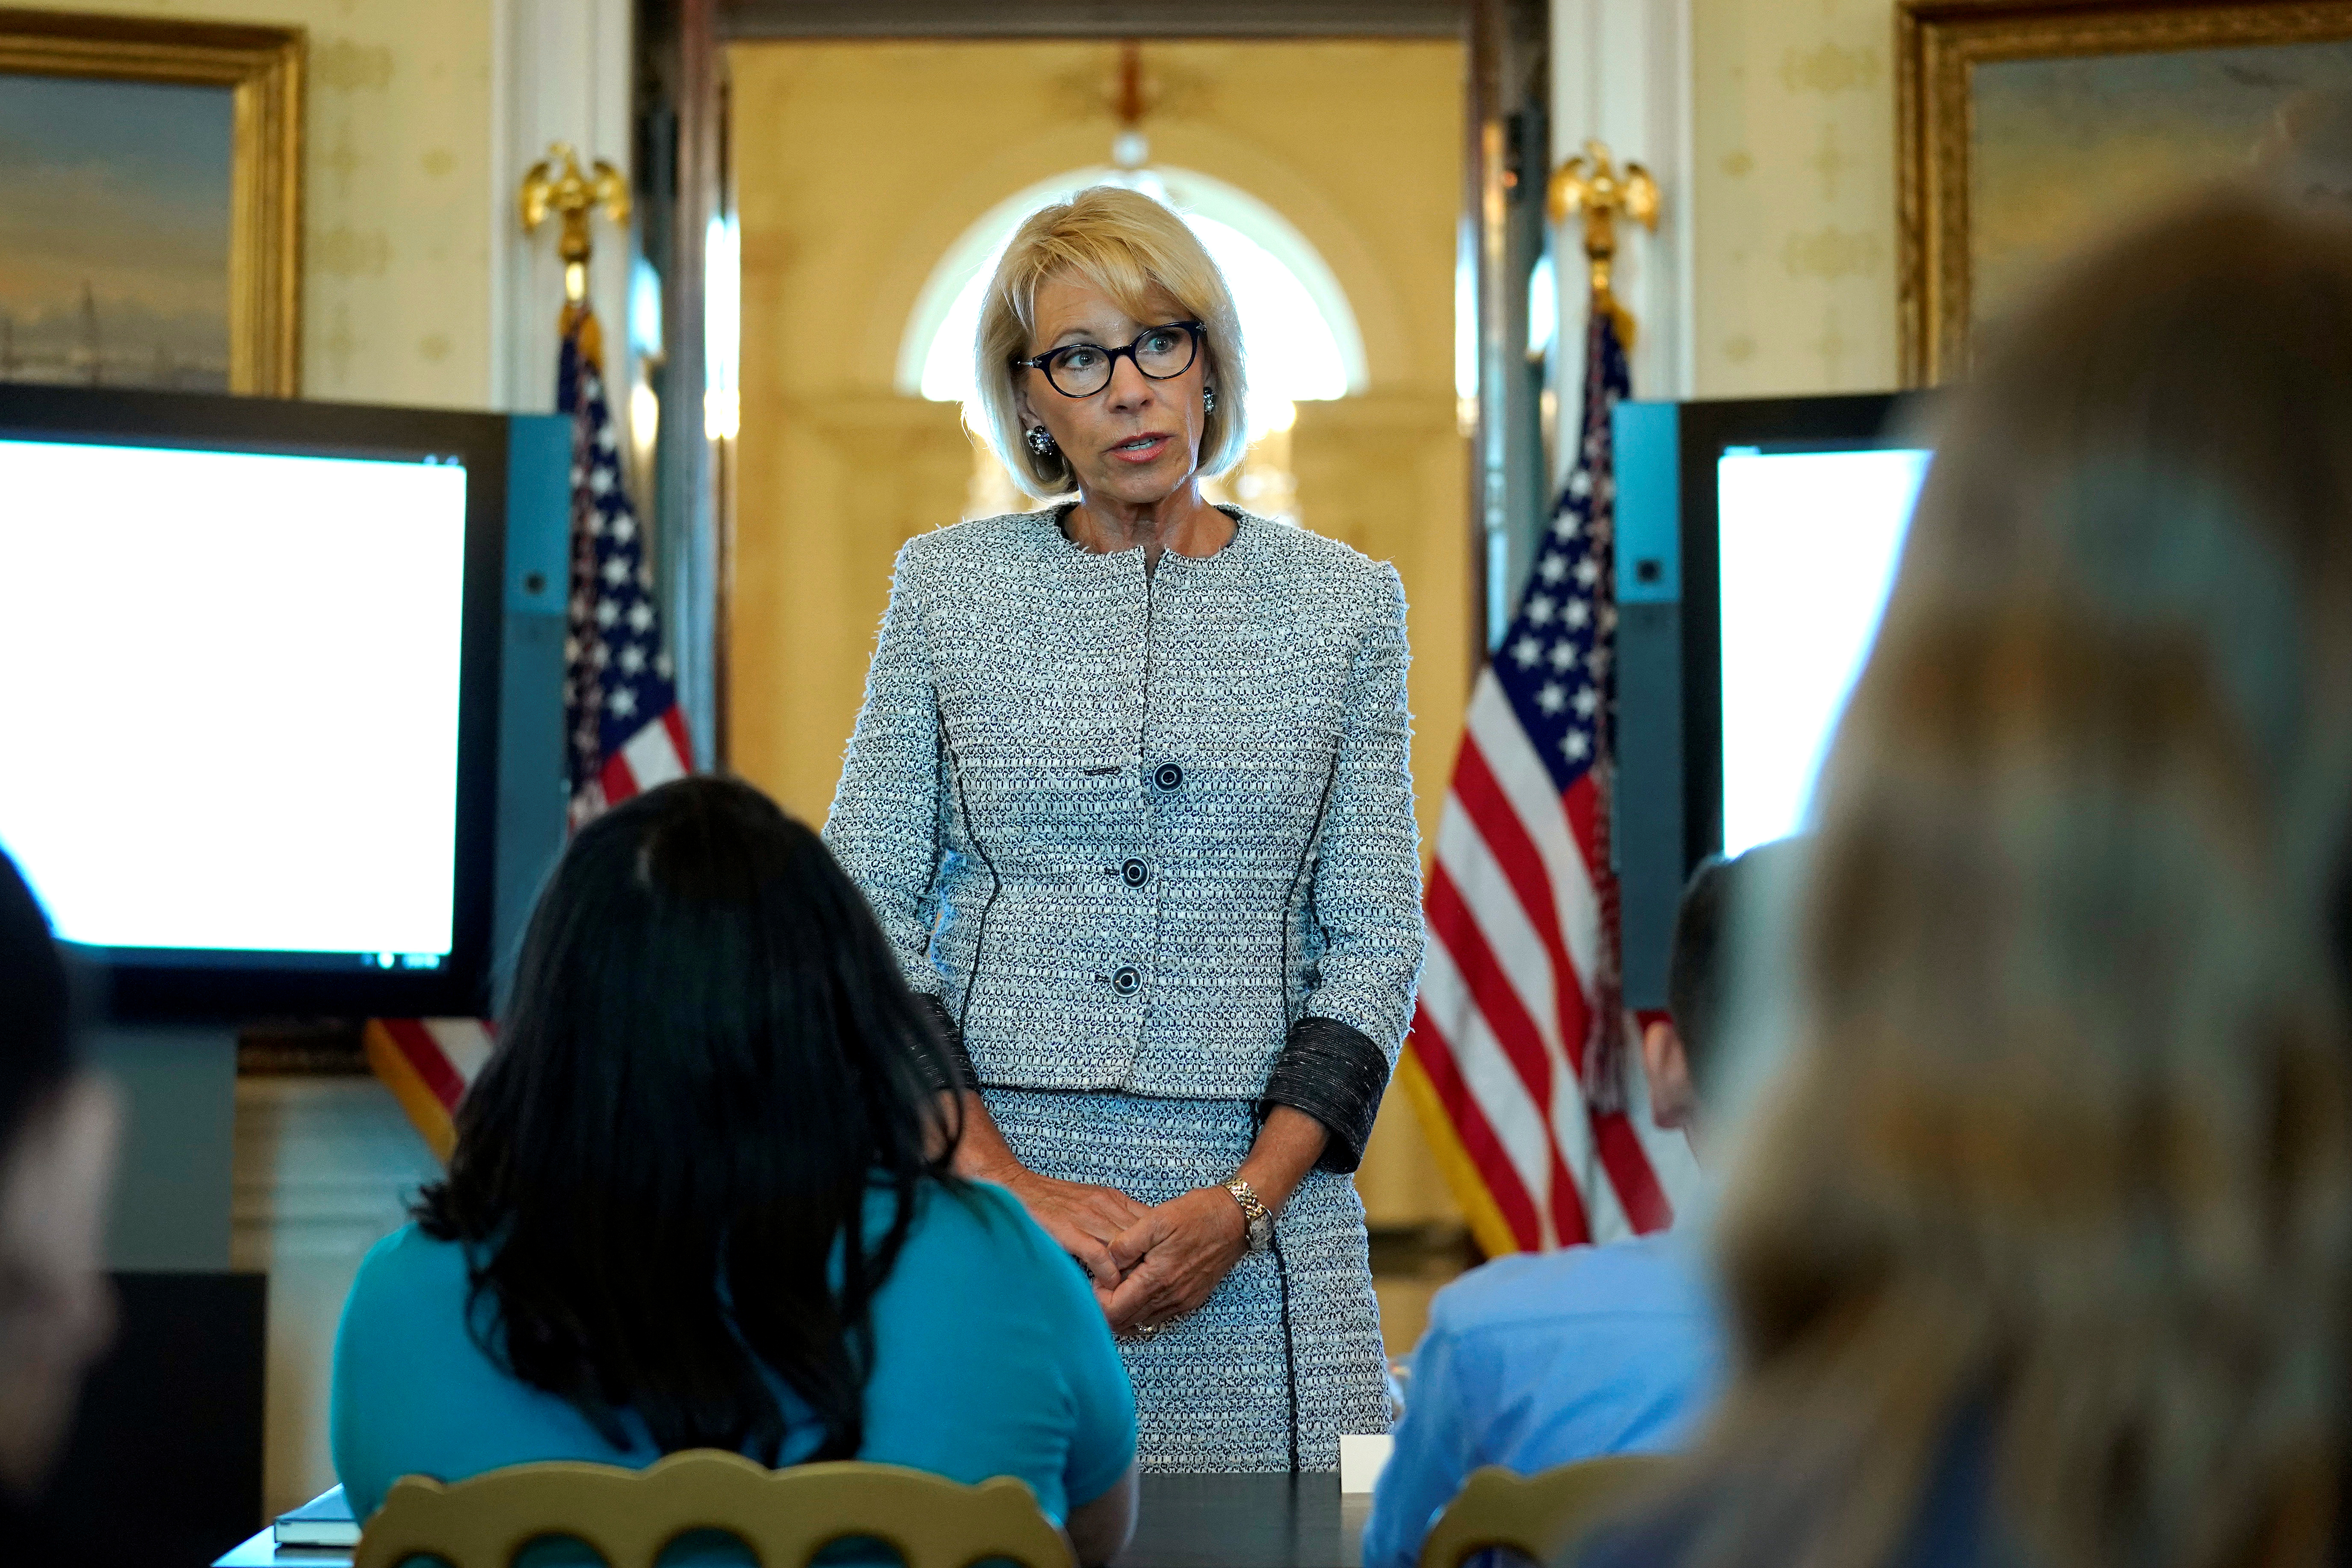 U.S. Secretary of Education Betsy DeVos speaks with school children during a listening session before the arrival of U.S. first lady Melania Trump at the White House in Washington, U.S., April 9, 2018. REUTERS/Joshua Roberts